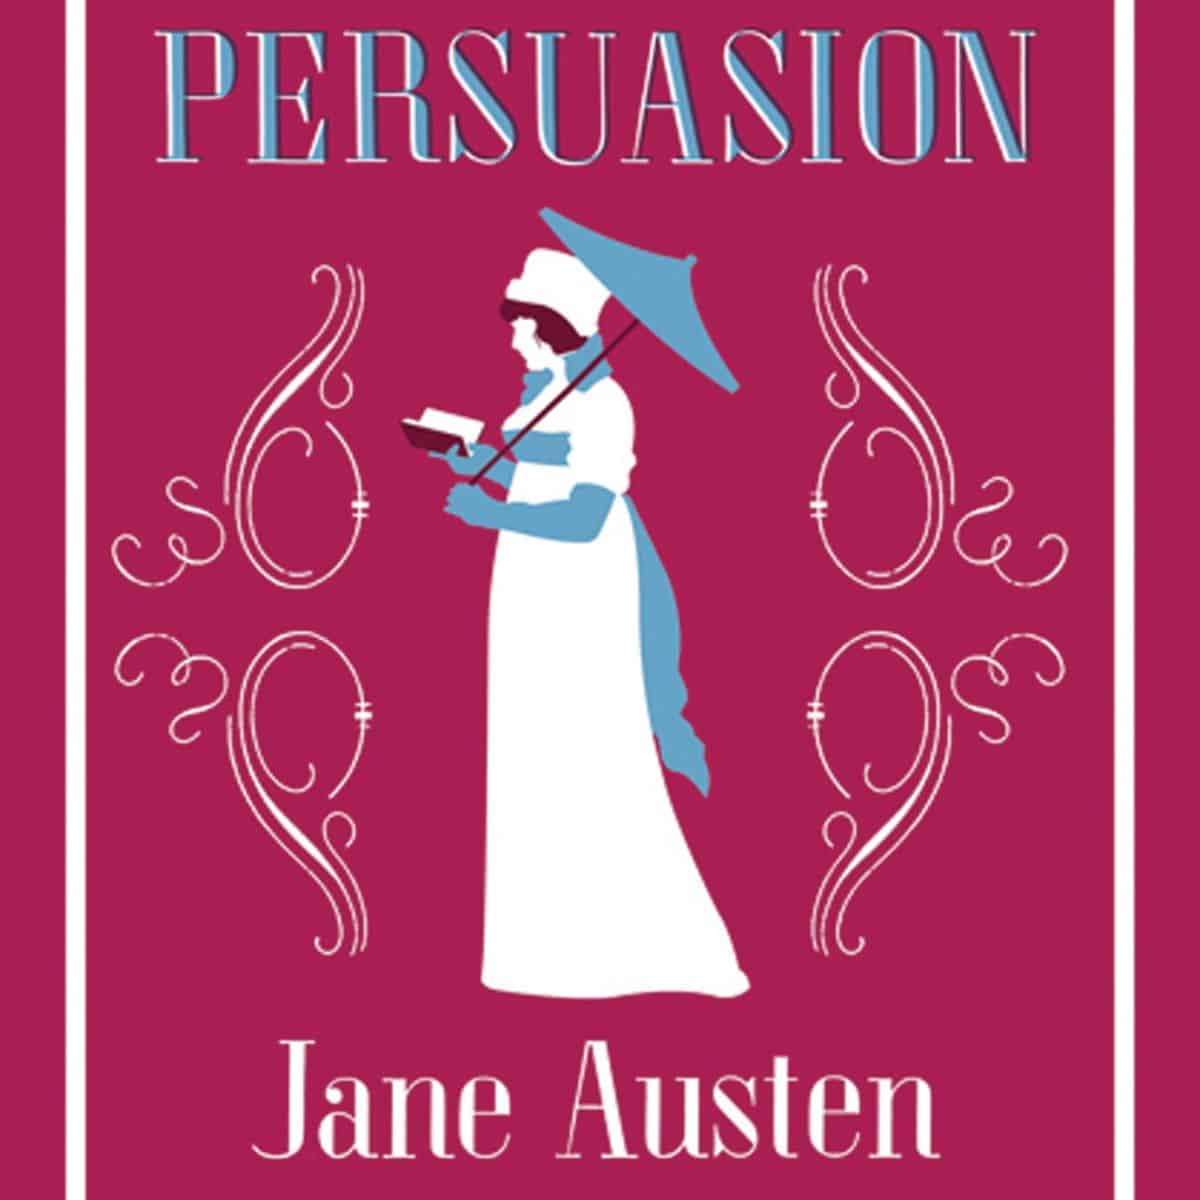 55 Best Jane Austen Persuasion Quotes from the Book